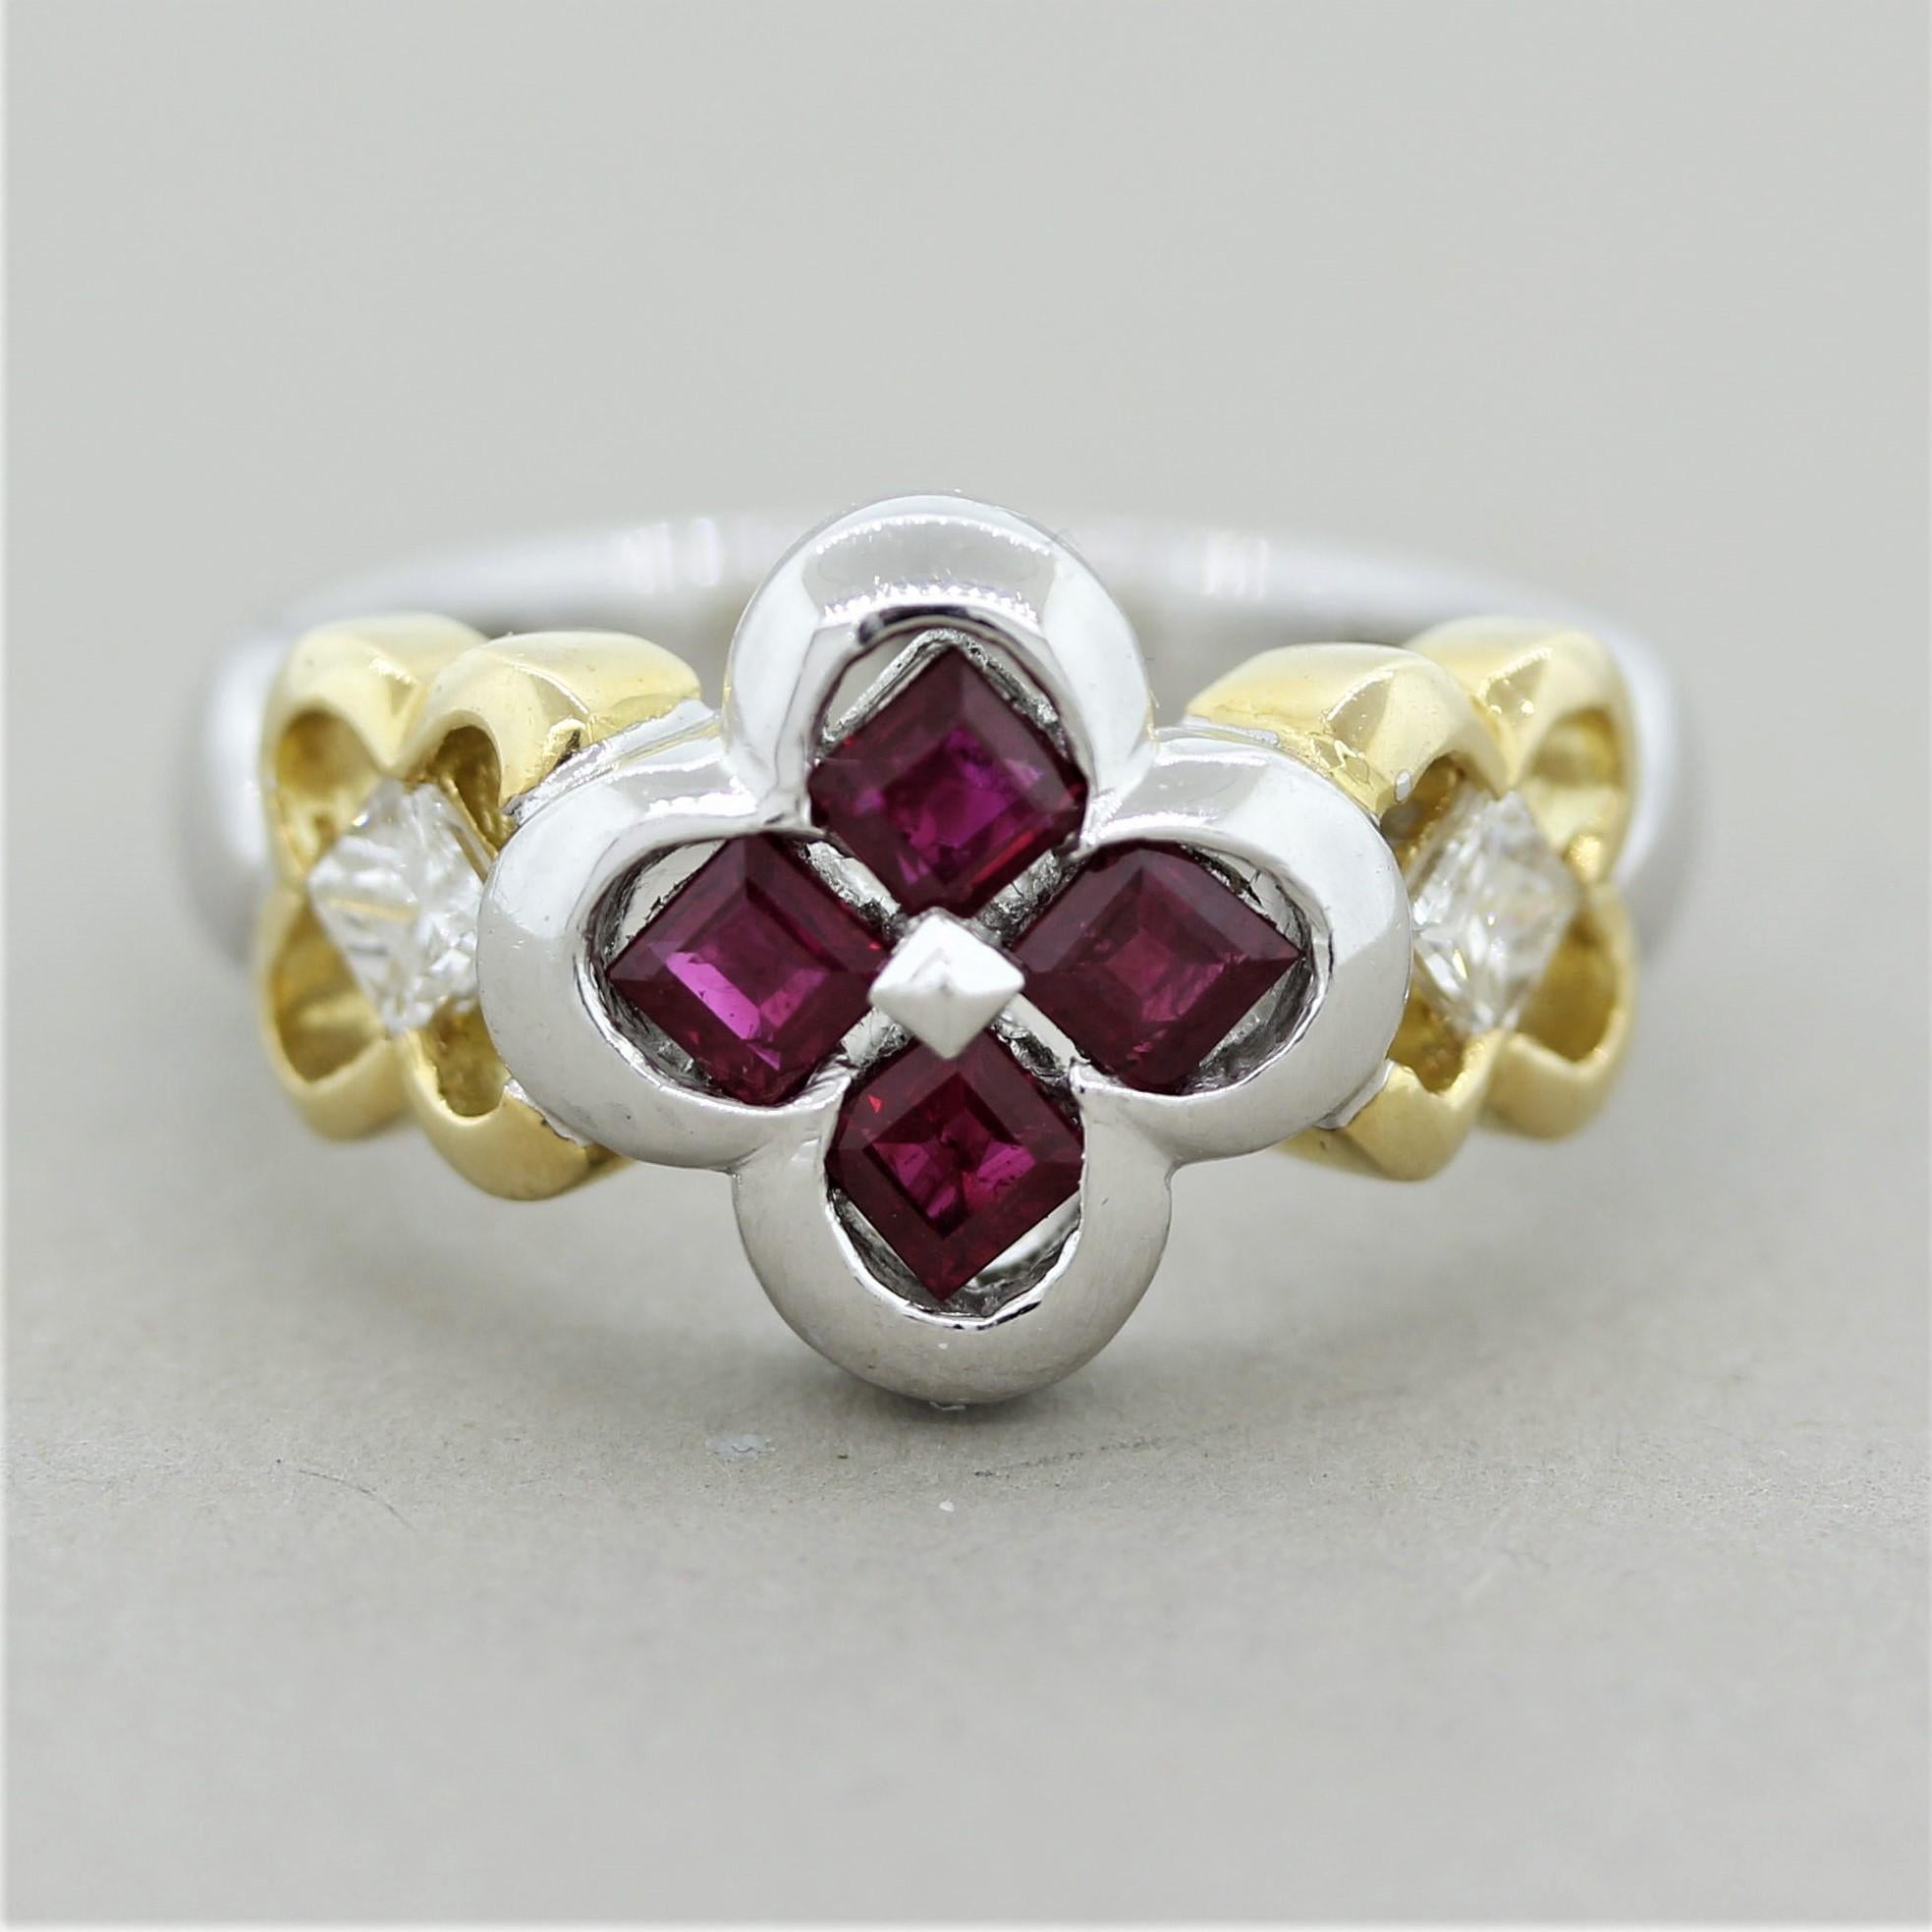 A sweet ring made in both platinum and 18k yellow gold, the best of both worlds! It features 4 square shaped bright red rubies weighing 0.94 carats which are set in the center of the ring in a floral pattern. Accenting the rubies are 2 princess-cut